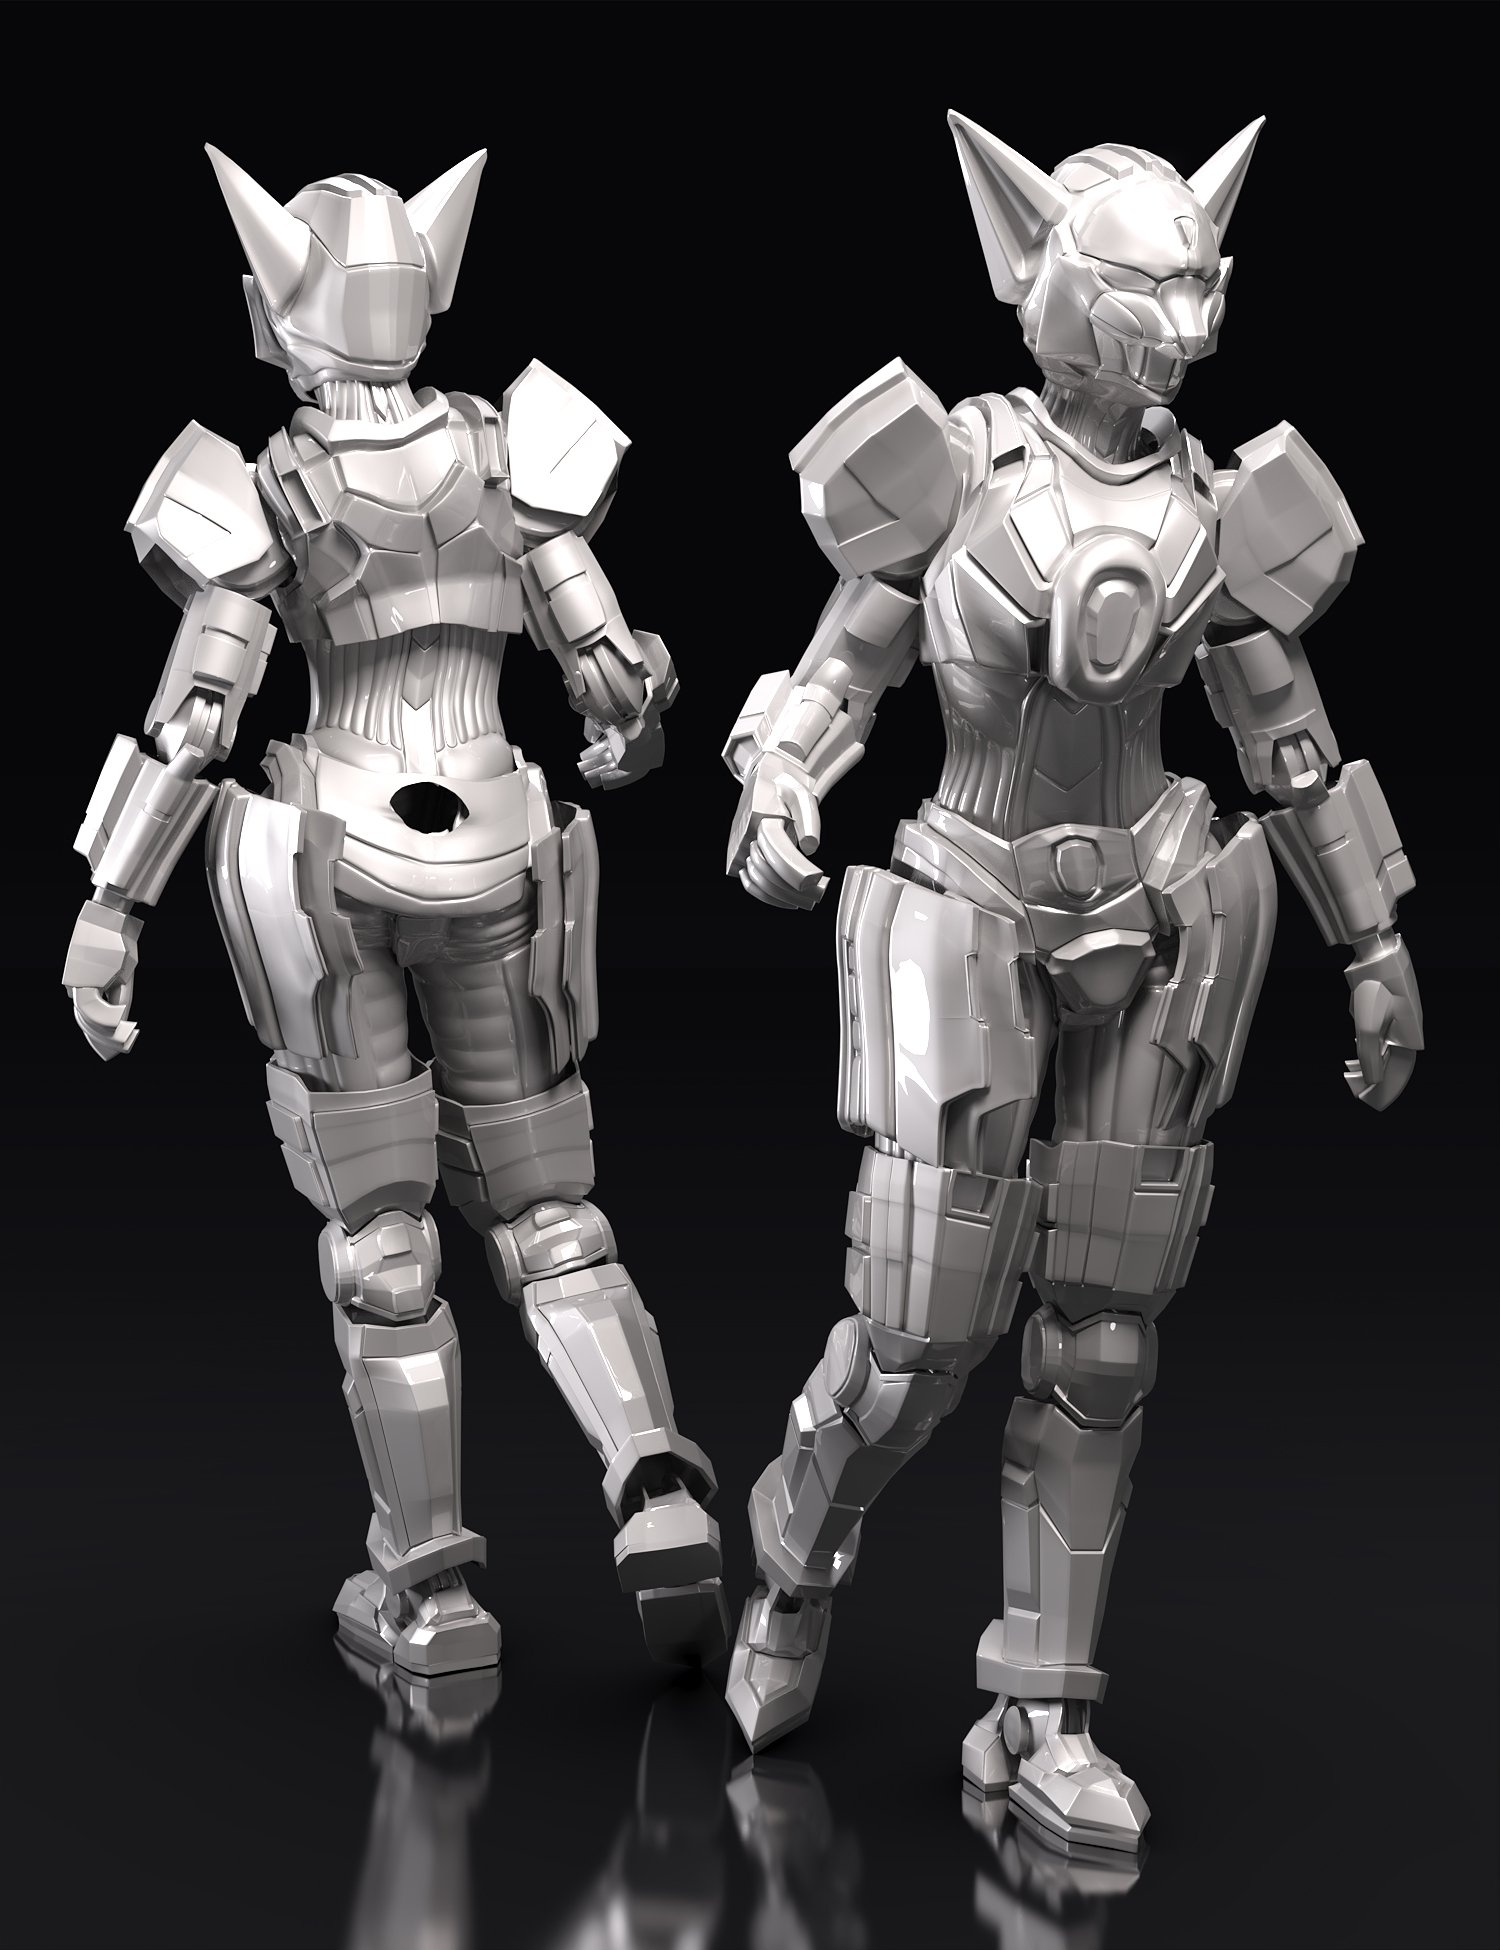 Kitsune Mech Armor for Genesis 8 and 8.1 Females by: Trickster3DX, 3D Models by Daz 3D